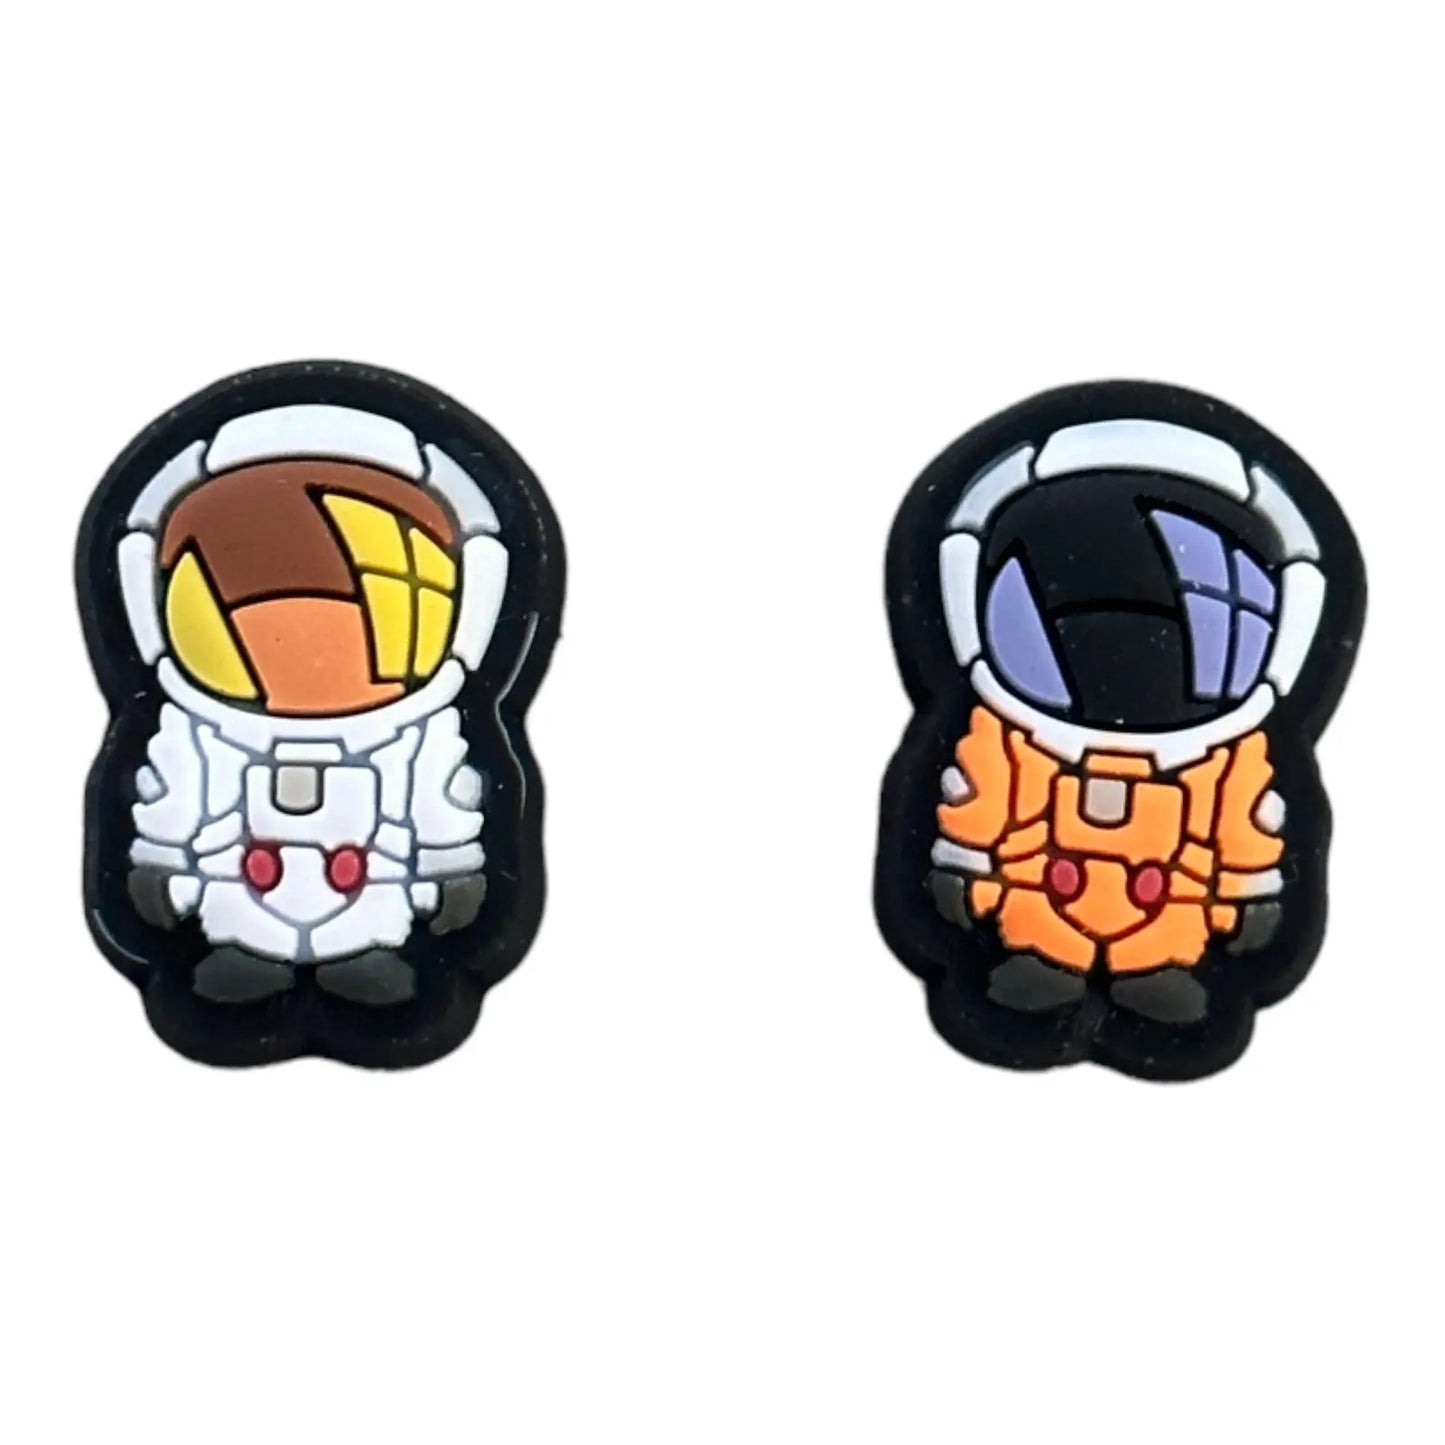 RE ASTROBEARS patchlab